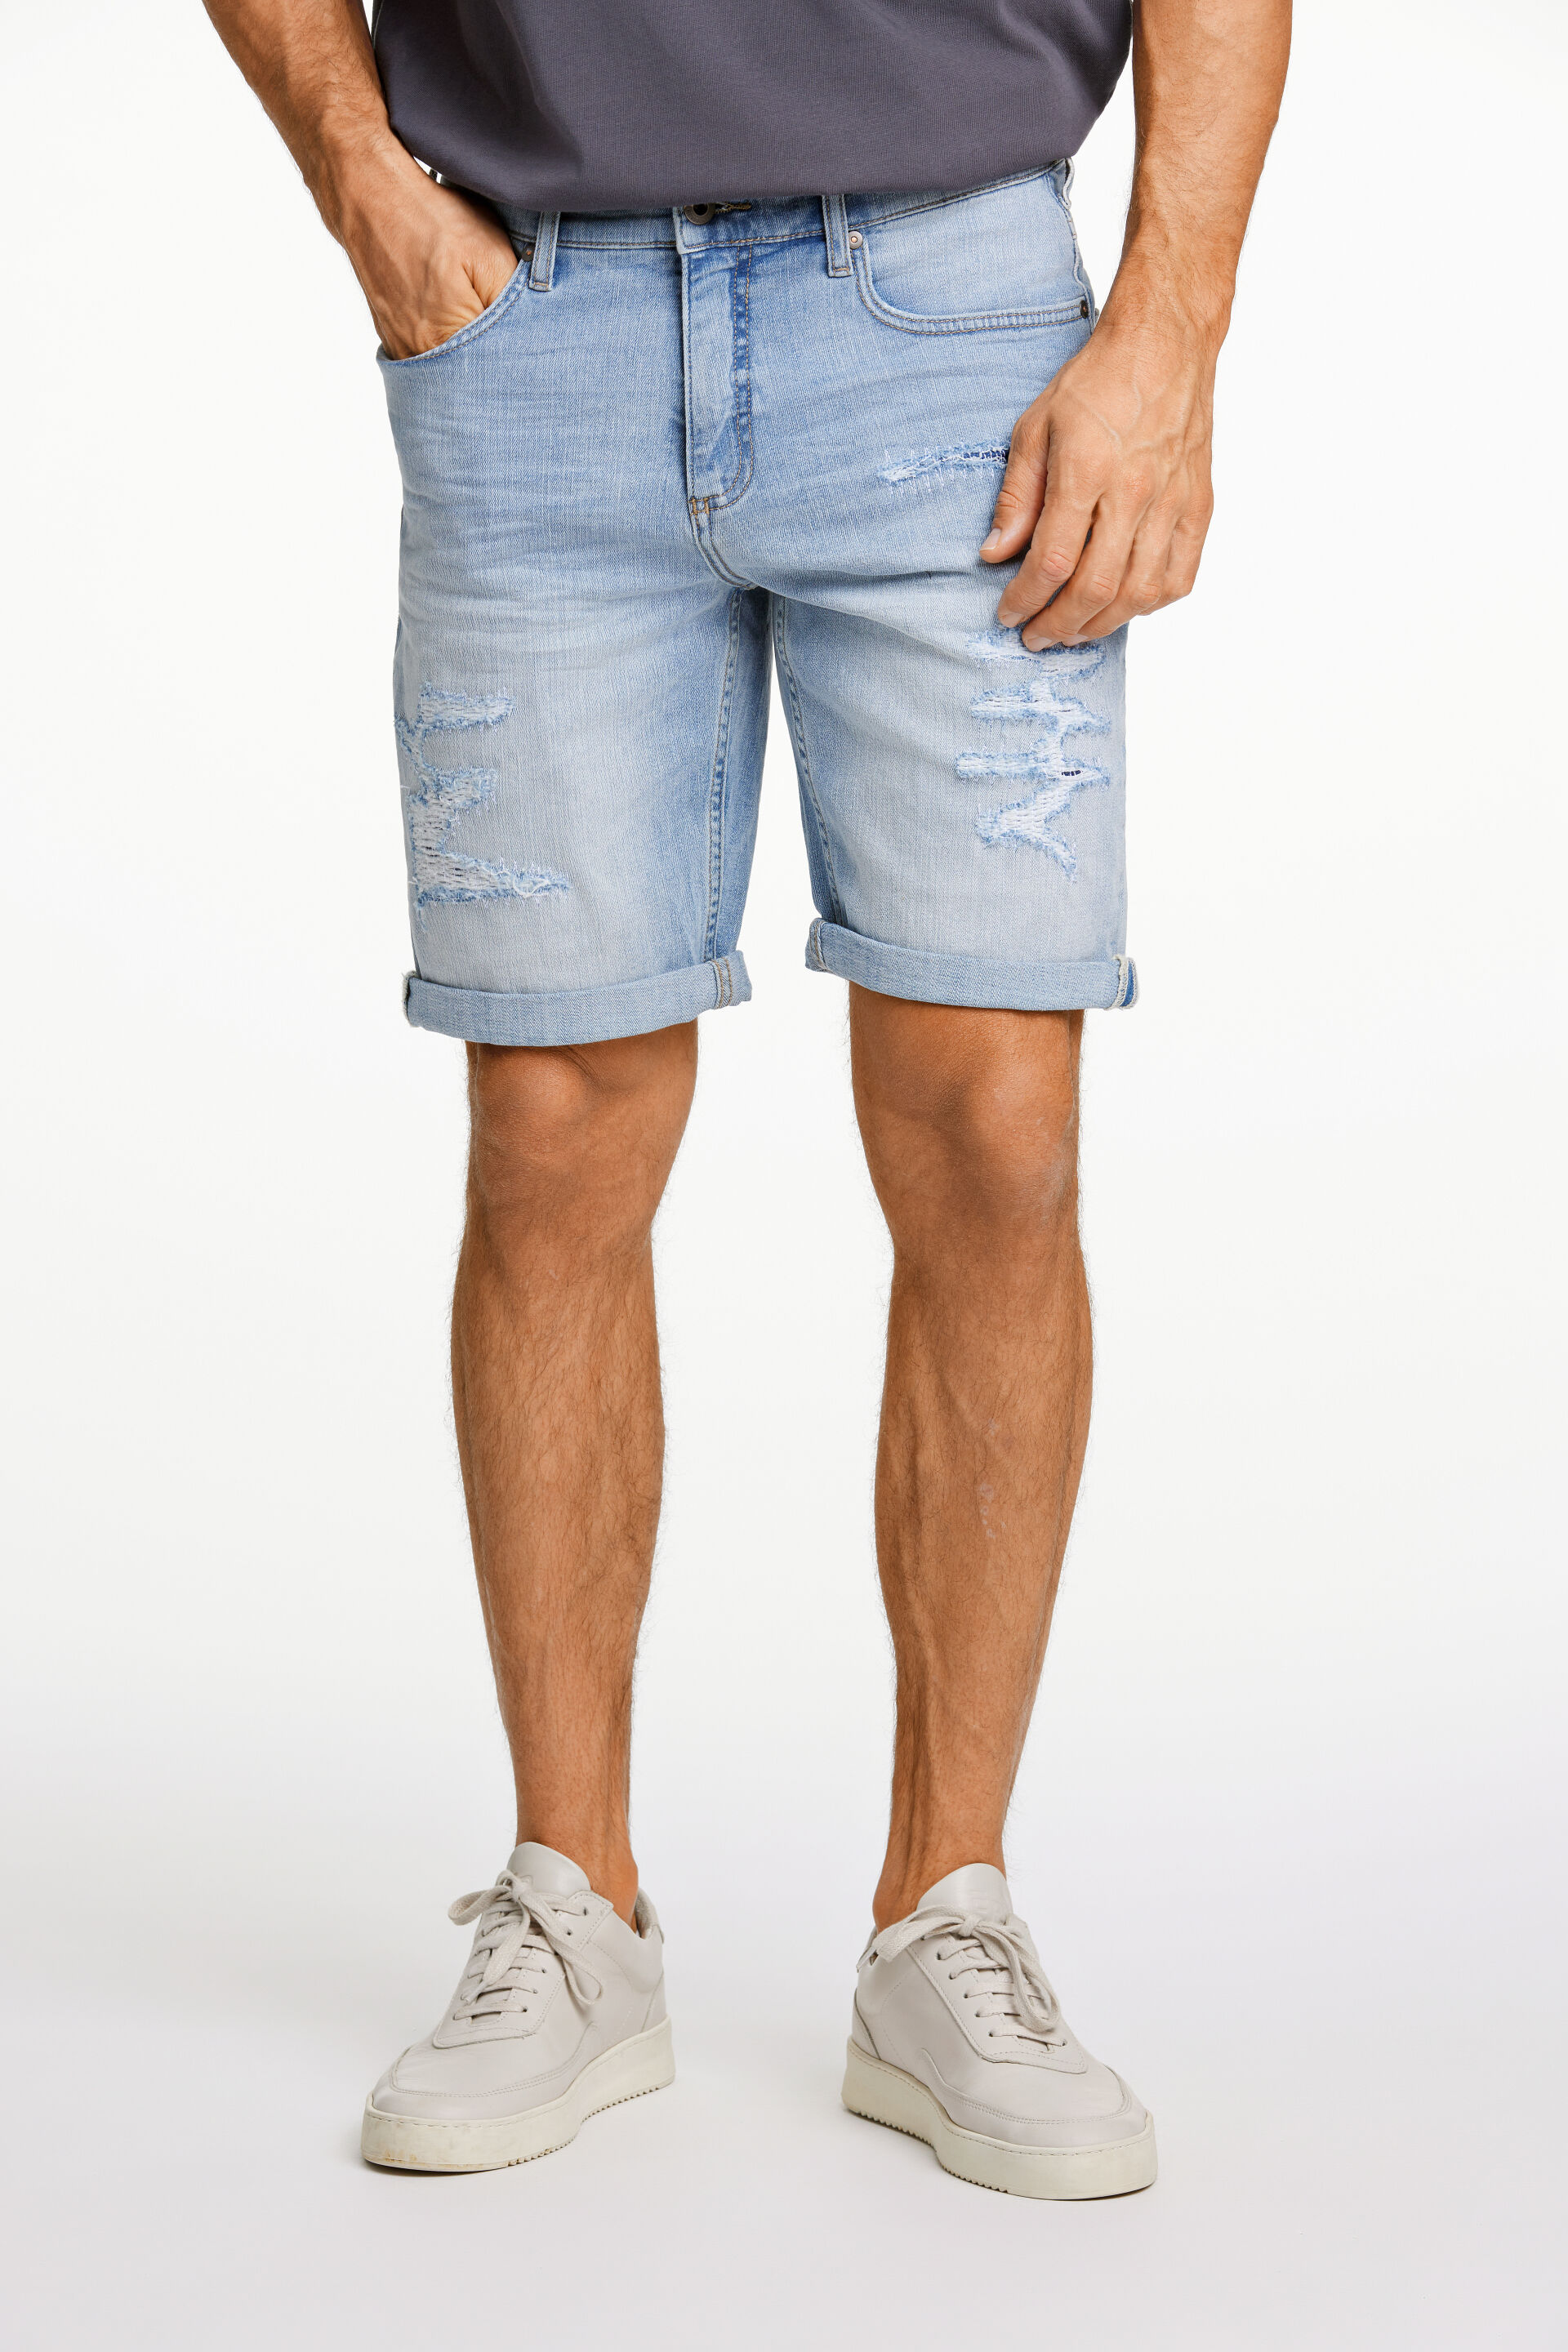 Jeans-Shorts